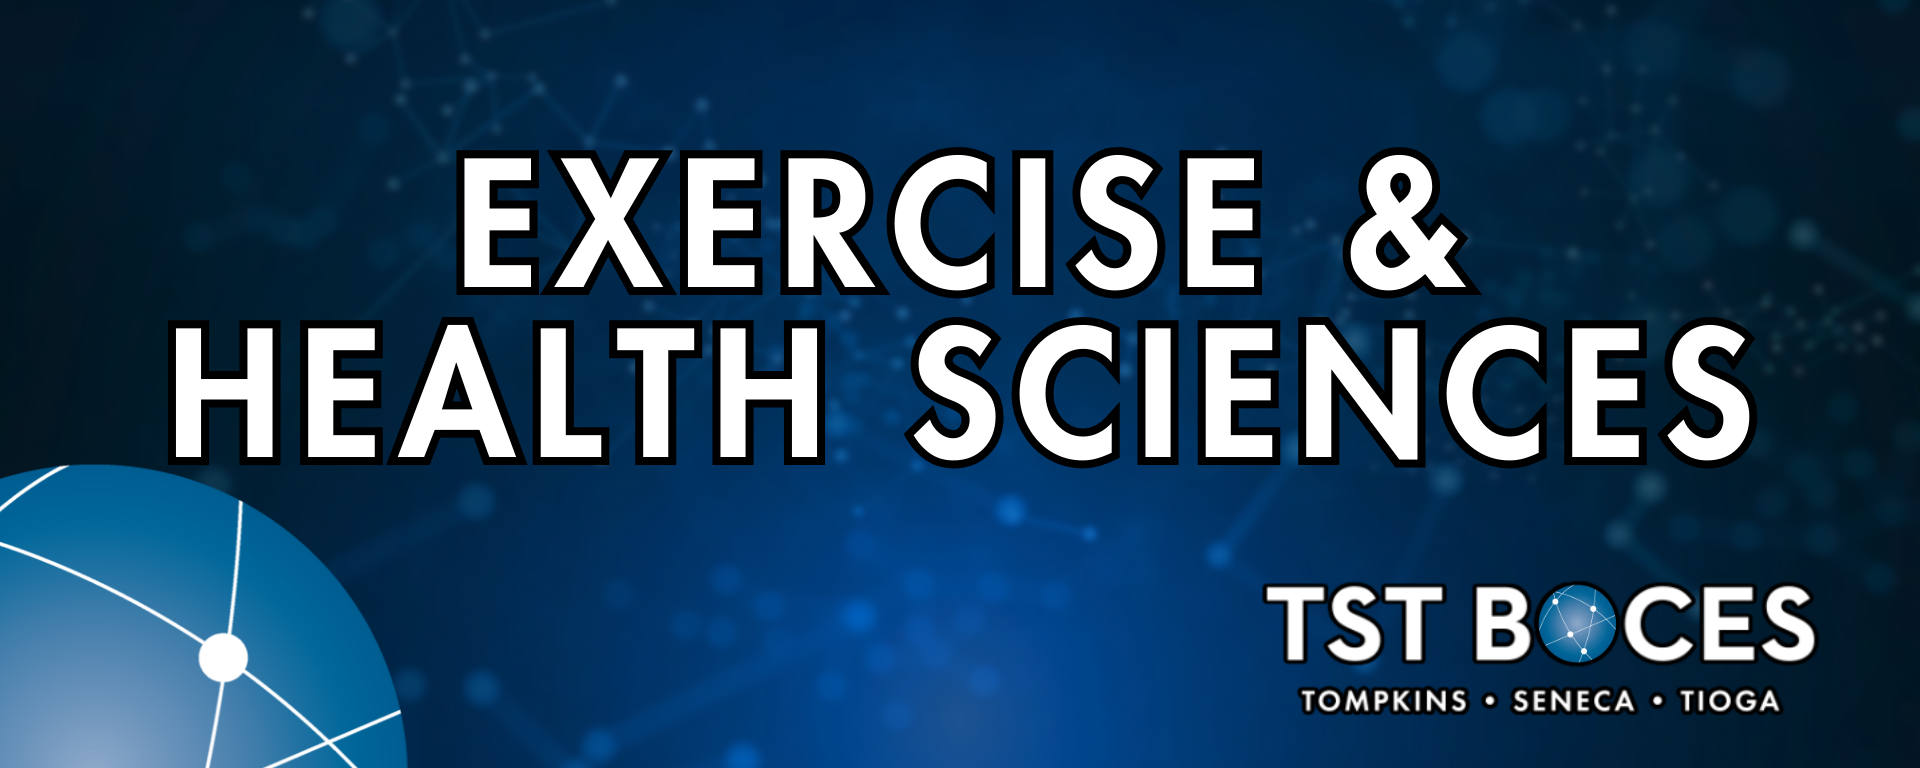 BANNER exercise and health sciences